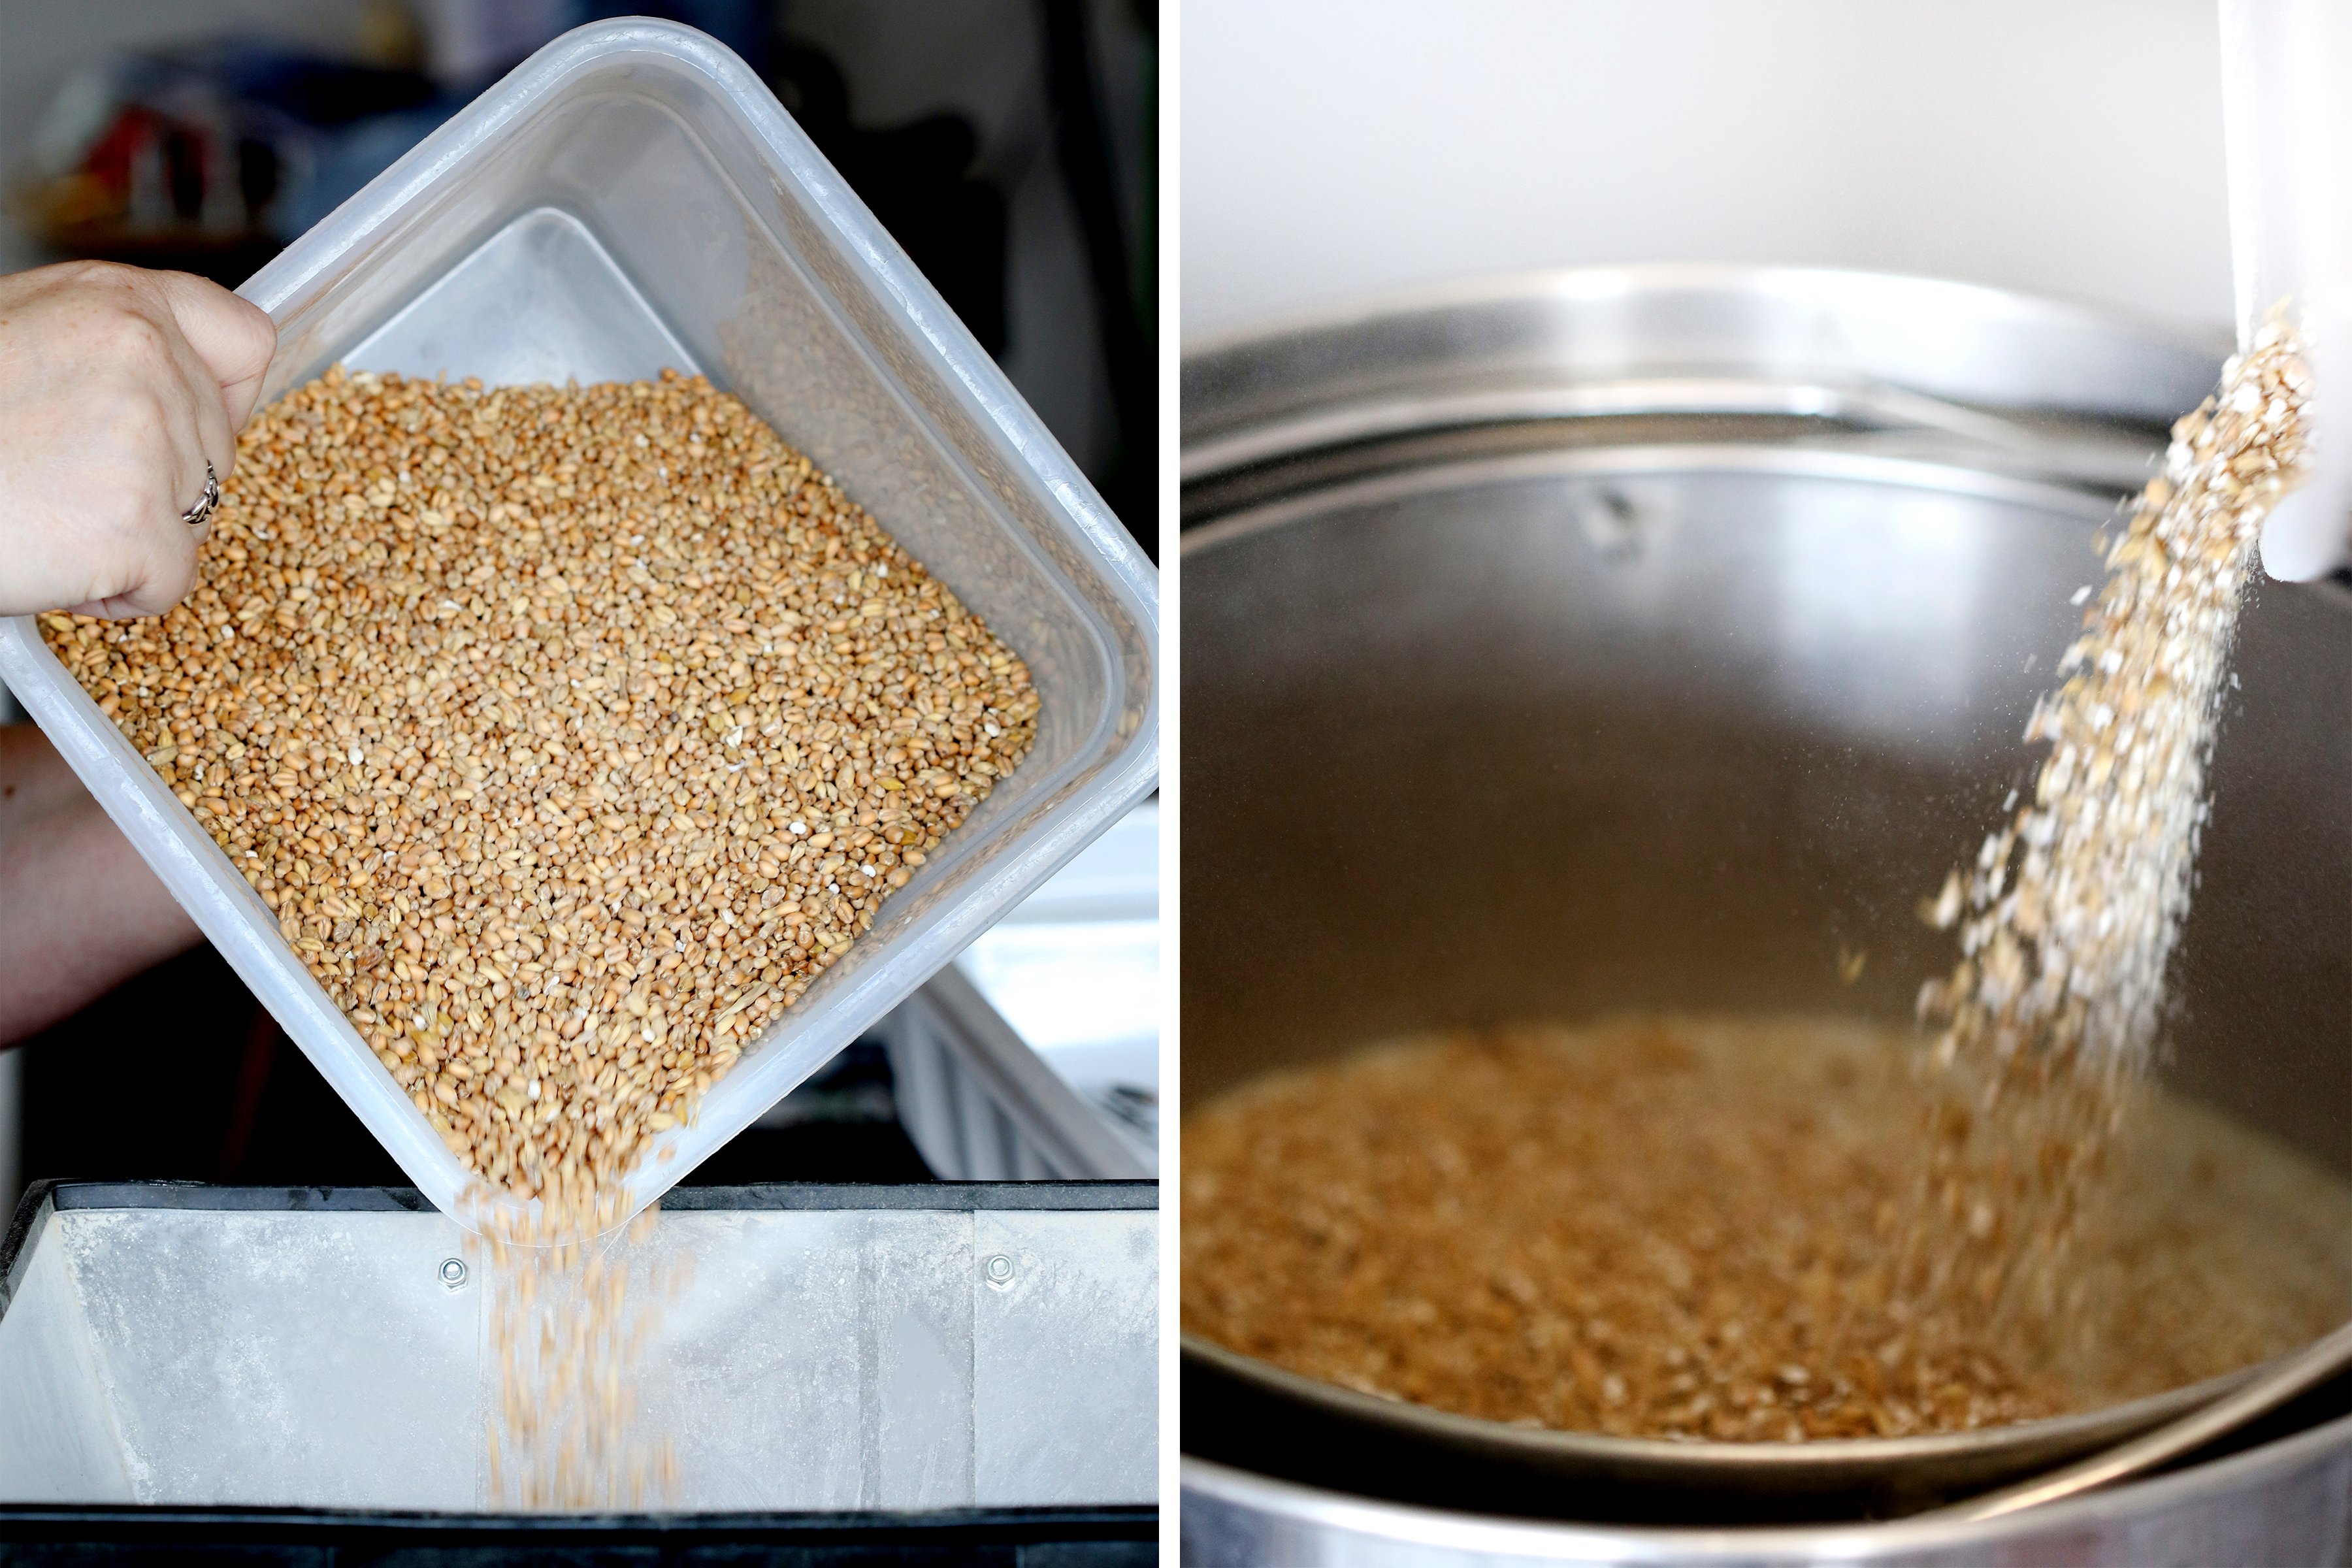 Milling grains for making an herbal witbier homebrew.